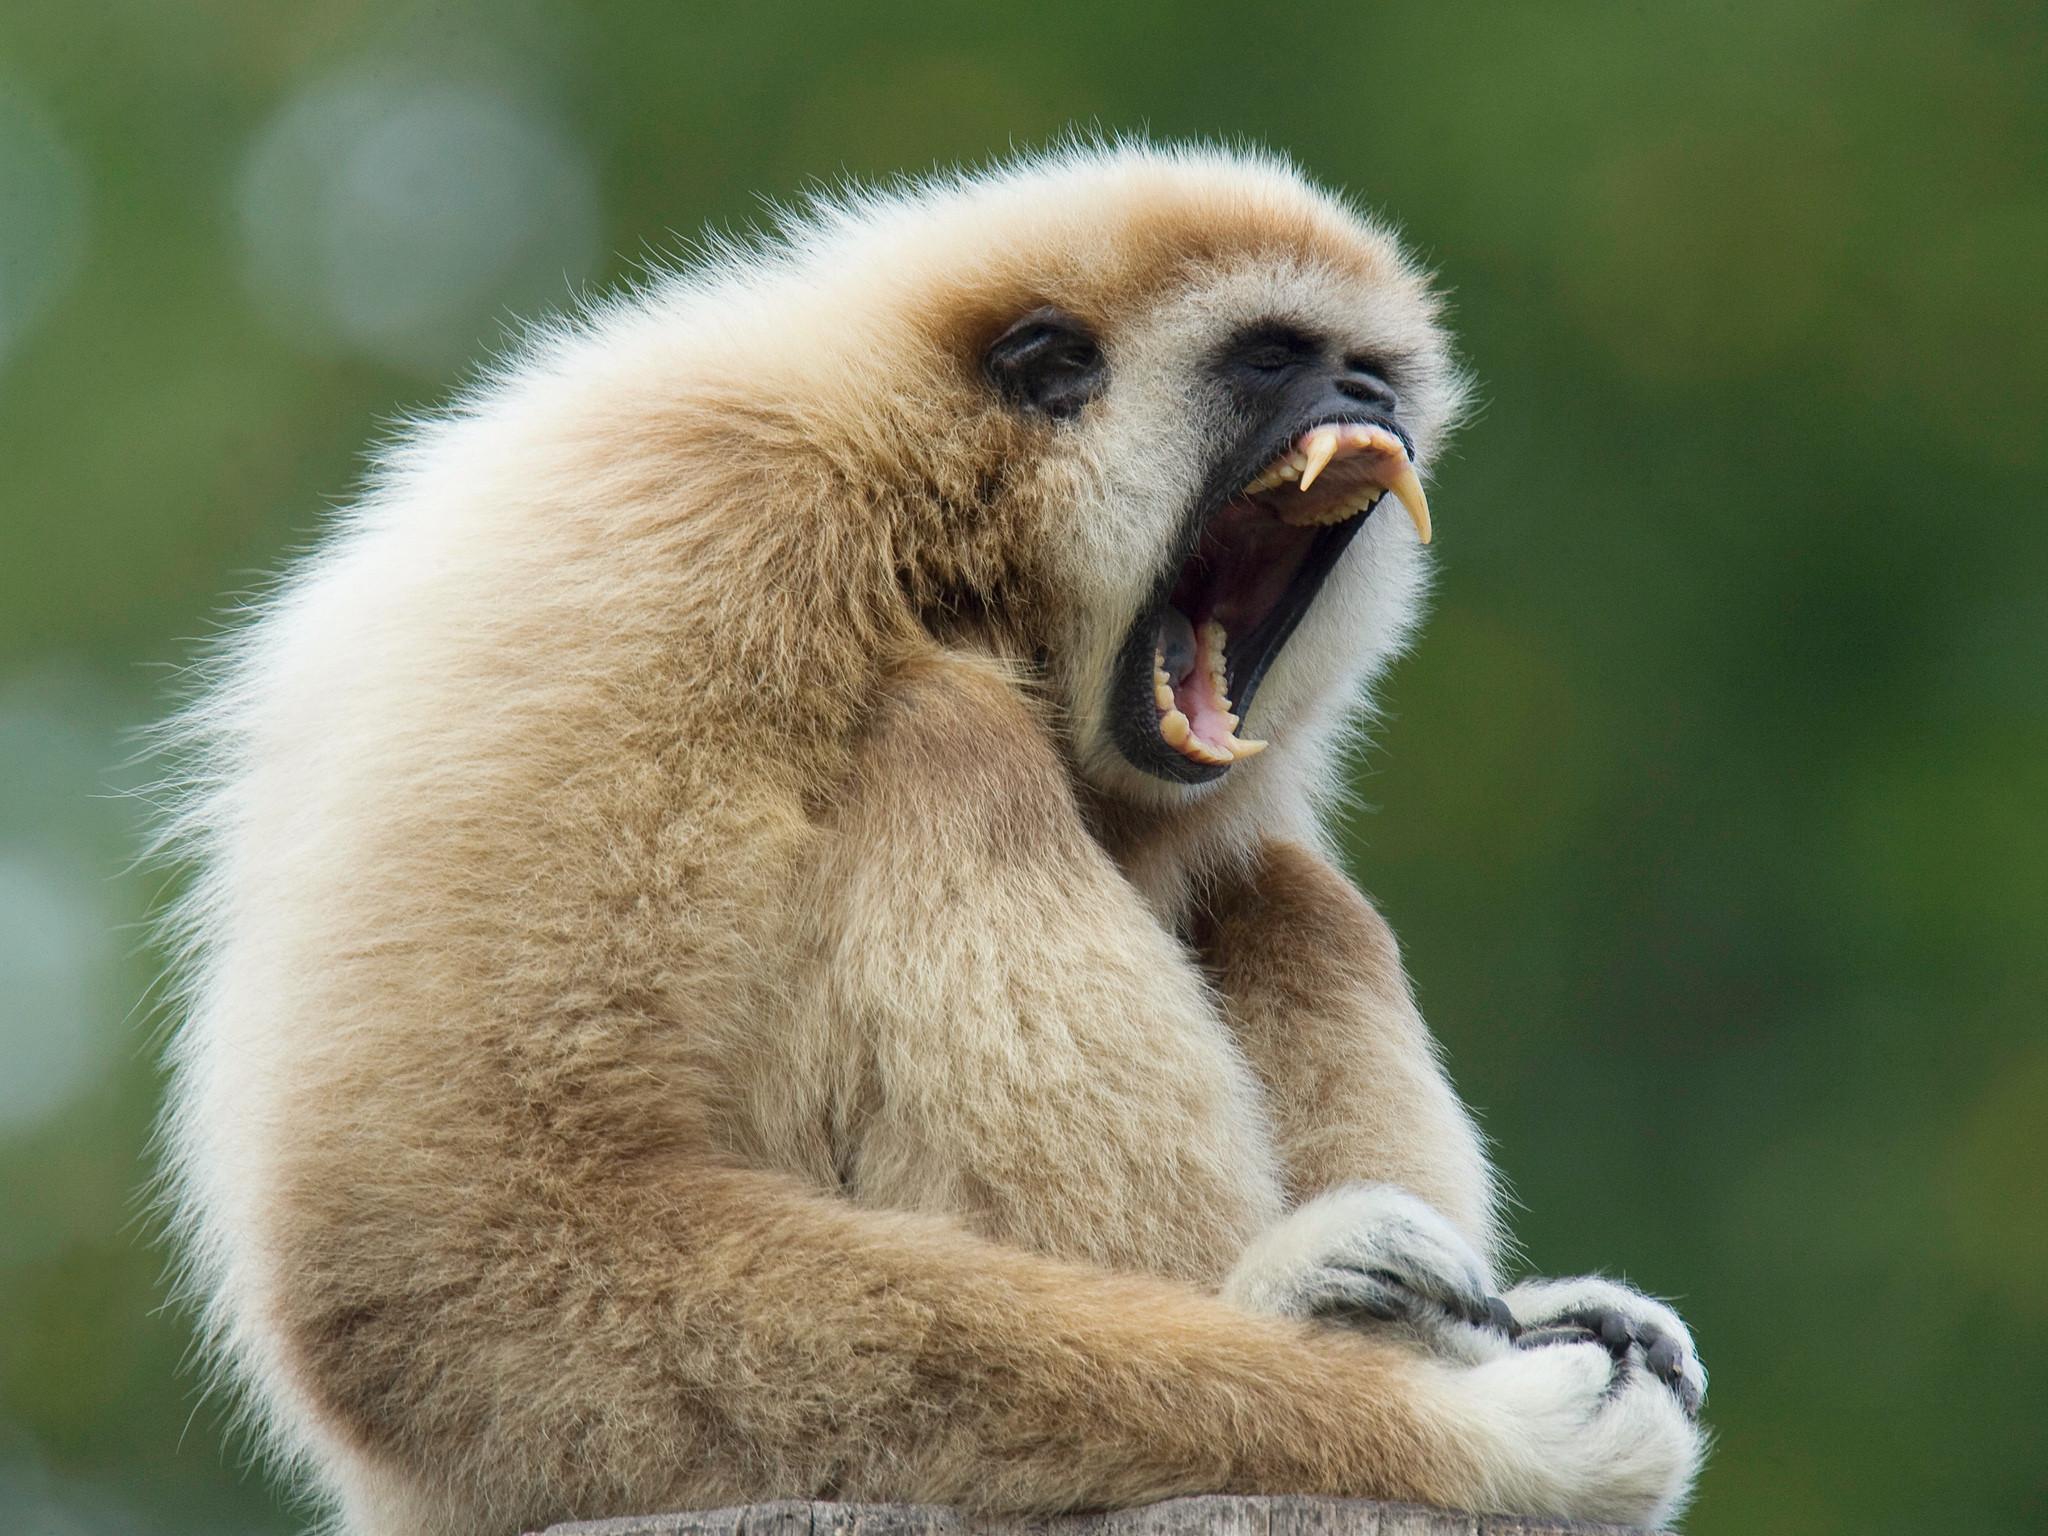 Gibbons and Opera Singers Use the Same Voice Tools